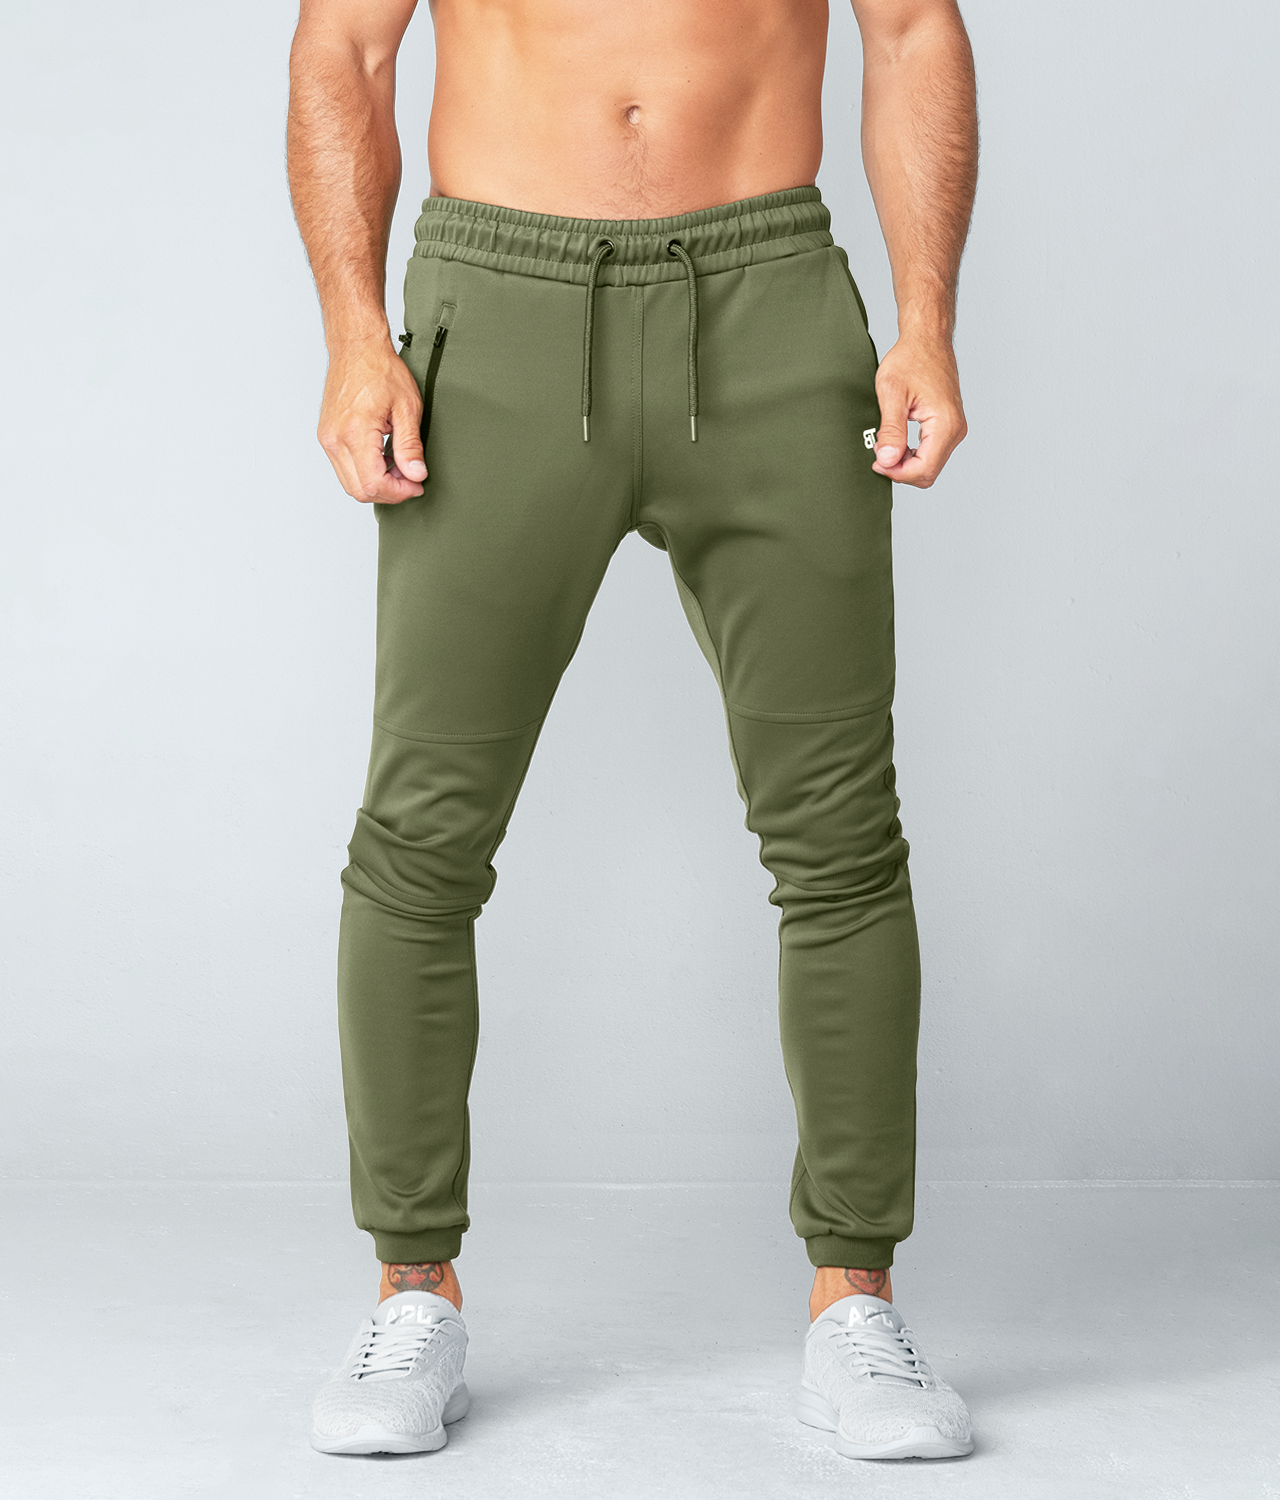 Buy LP ATHLEISURE Green Solid Cotton Slim Fit Mens Joggers | Shoppers Stop